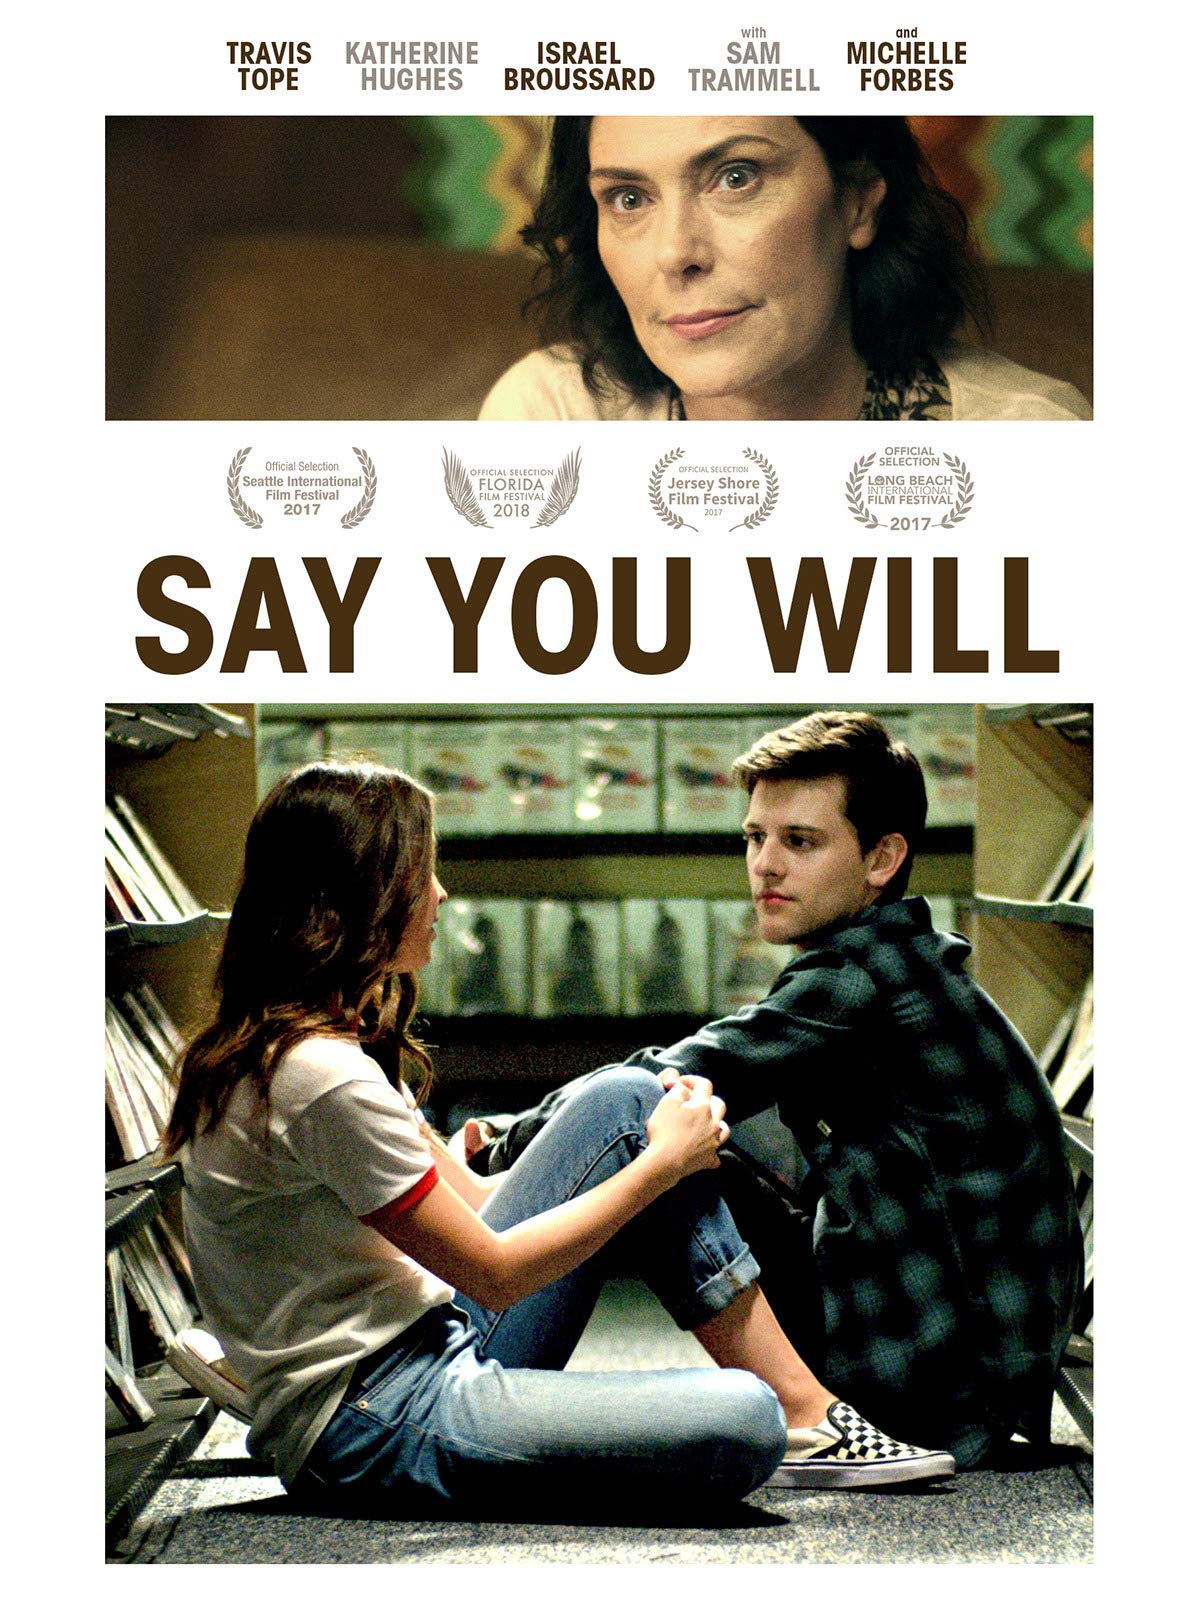 FULL MOVIE: Say You Will (2017)